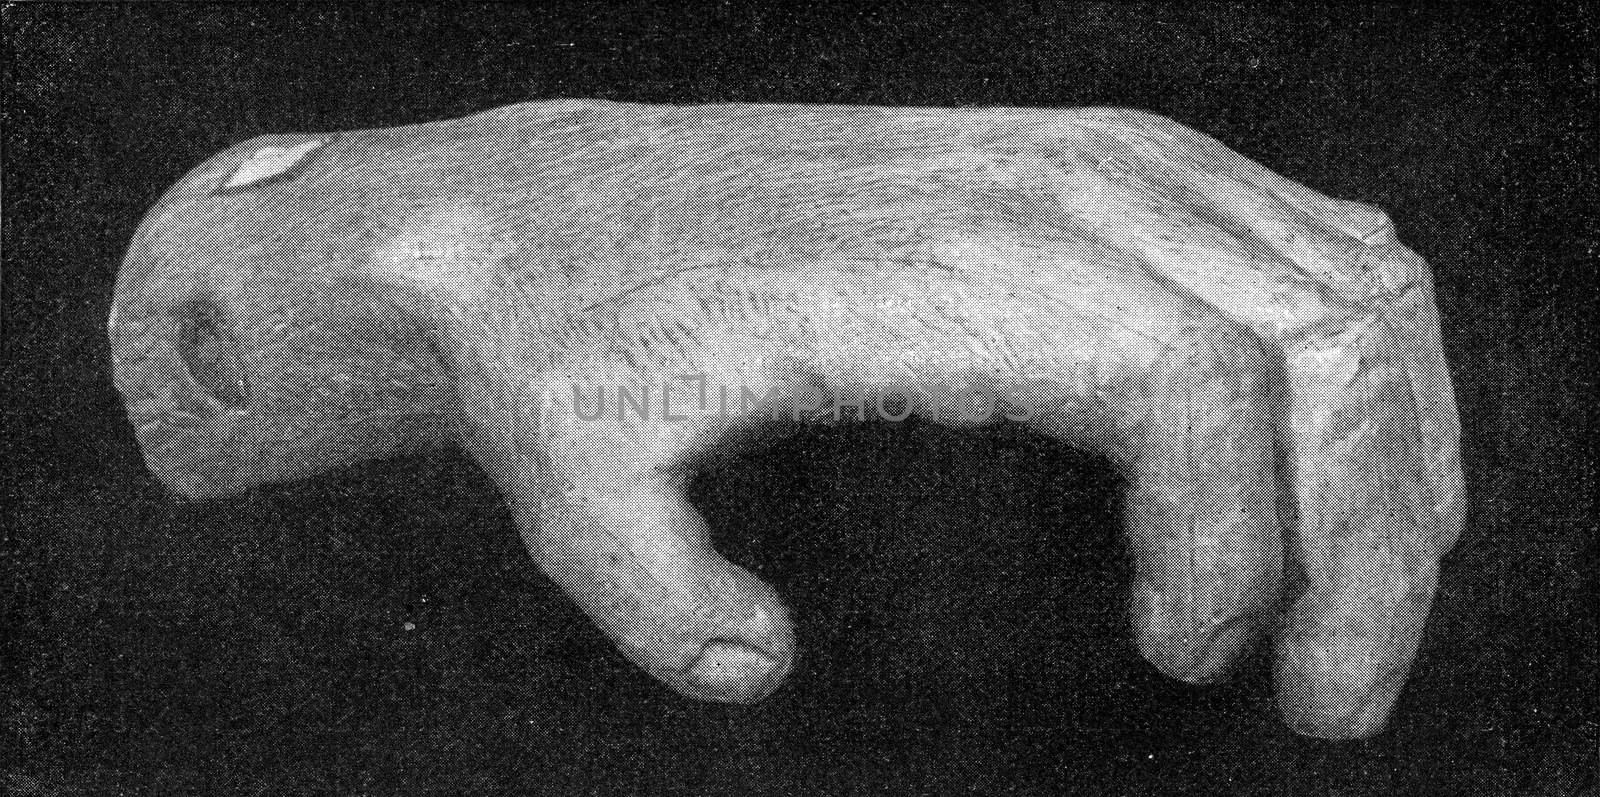 Hand of an elderly gorilla, vintage engraved illustration. From the Universe and Humanity, 1910.
